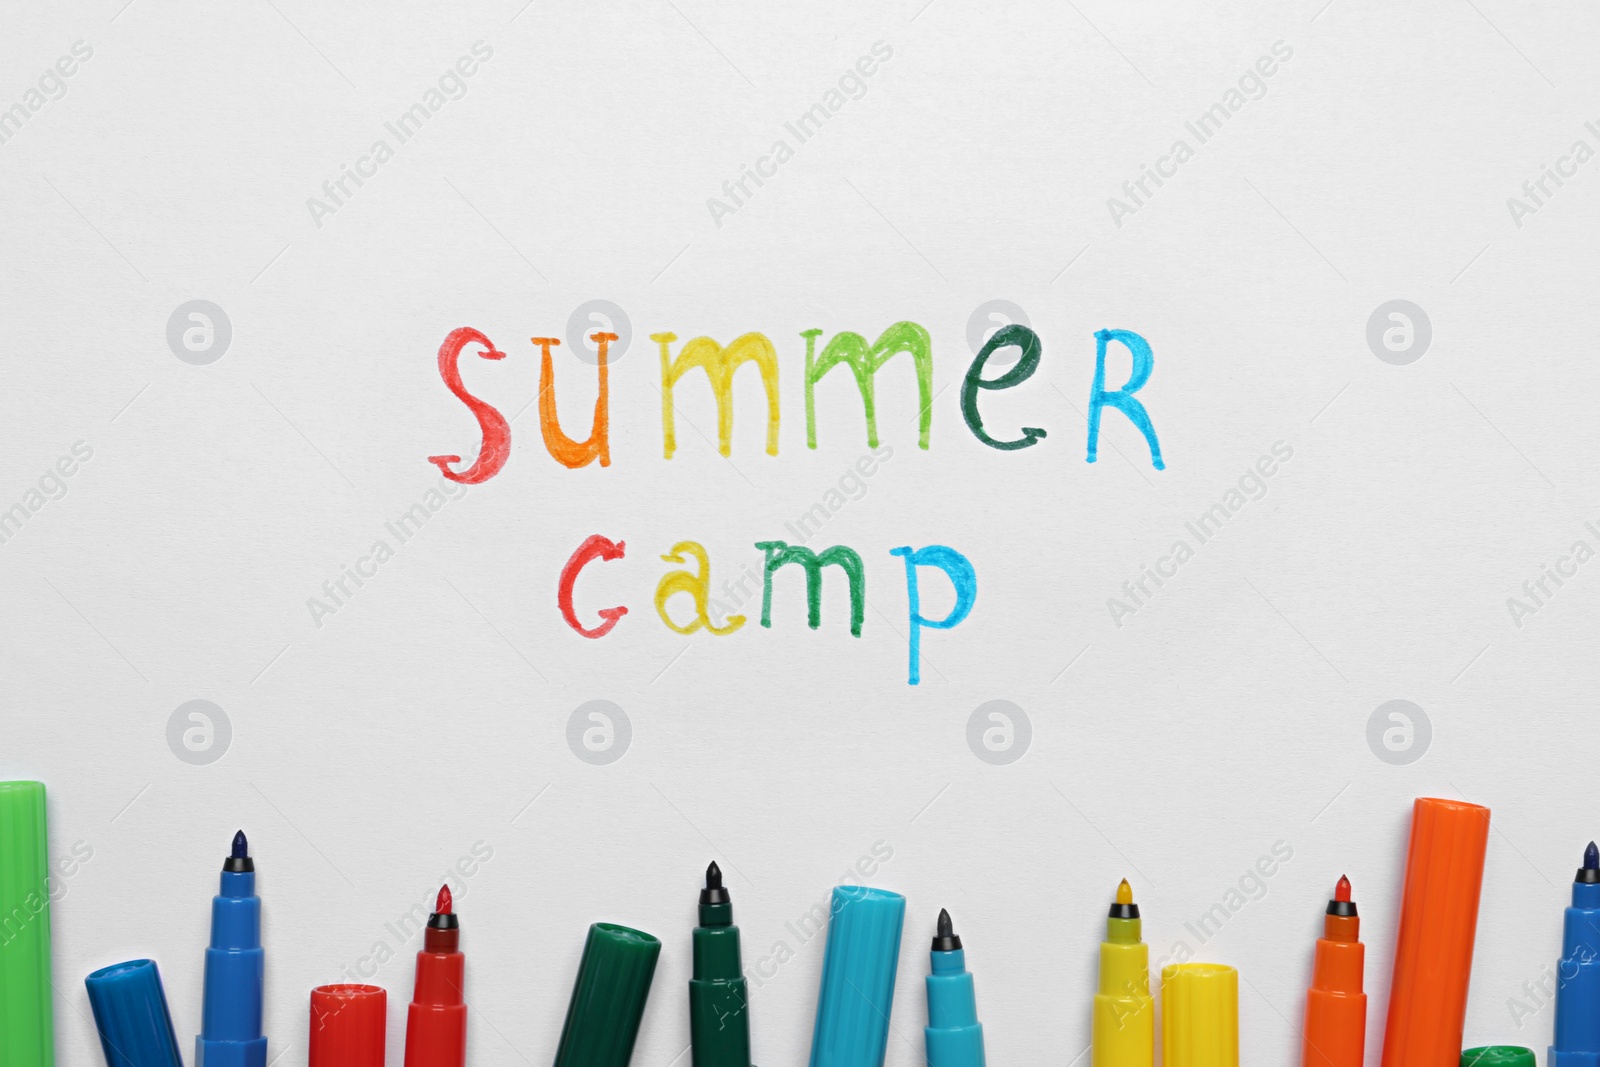 Photo of Text SUMMER CAMP and colorful felt tip pens on white paper, flat lay